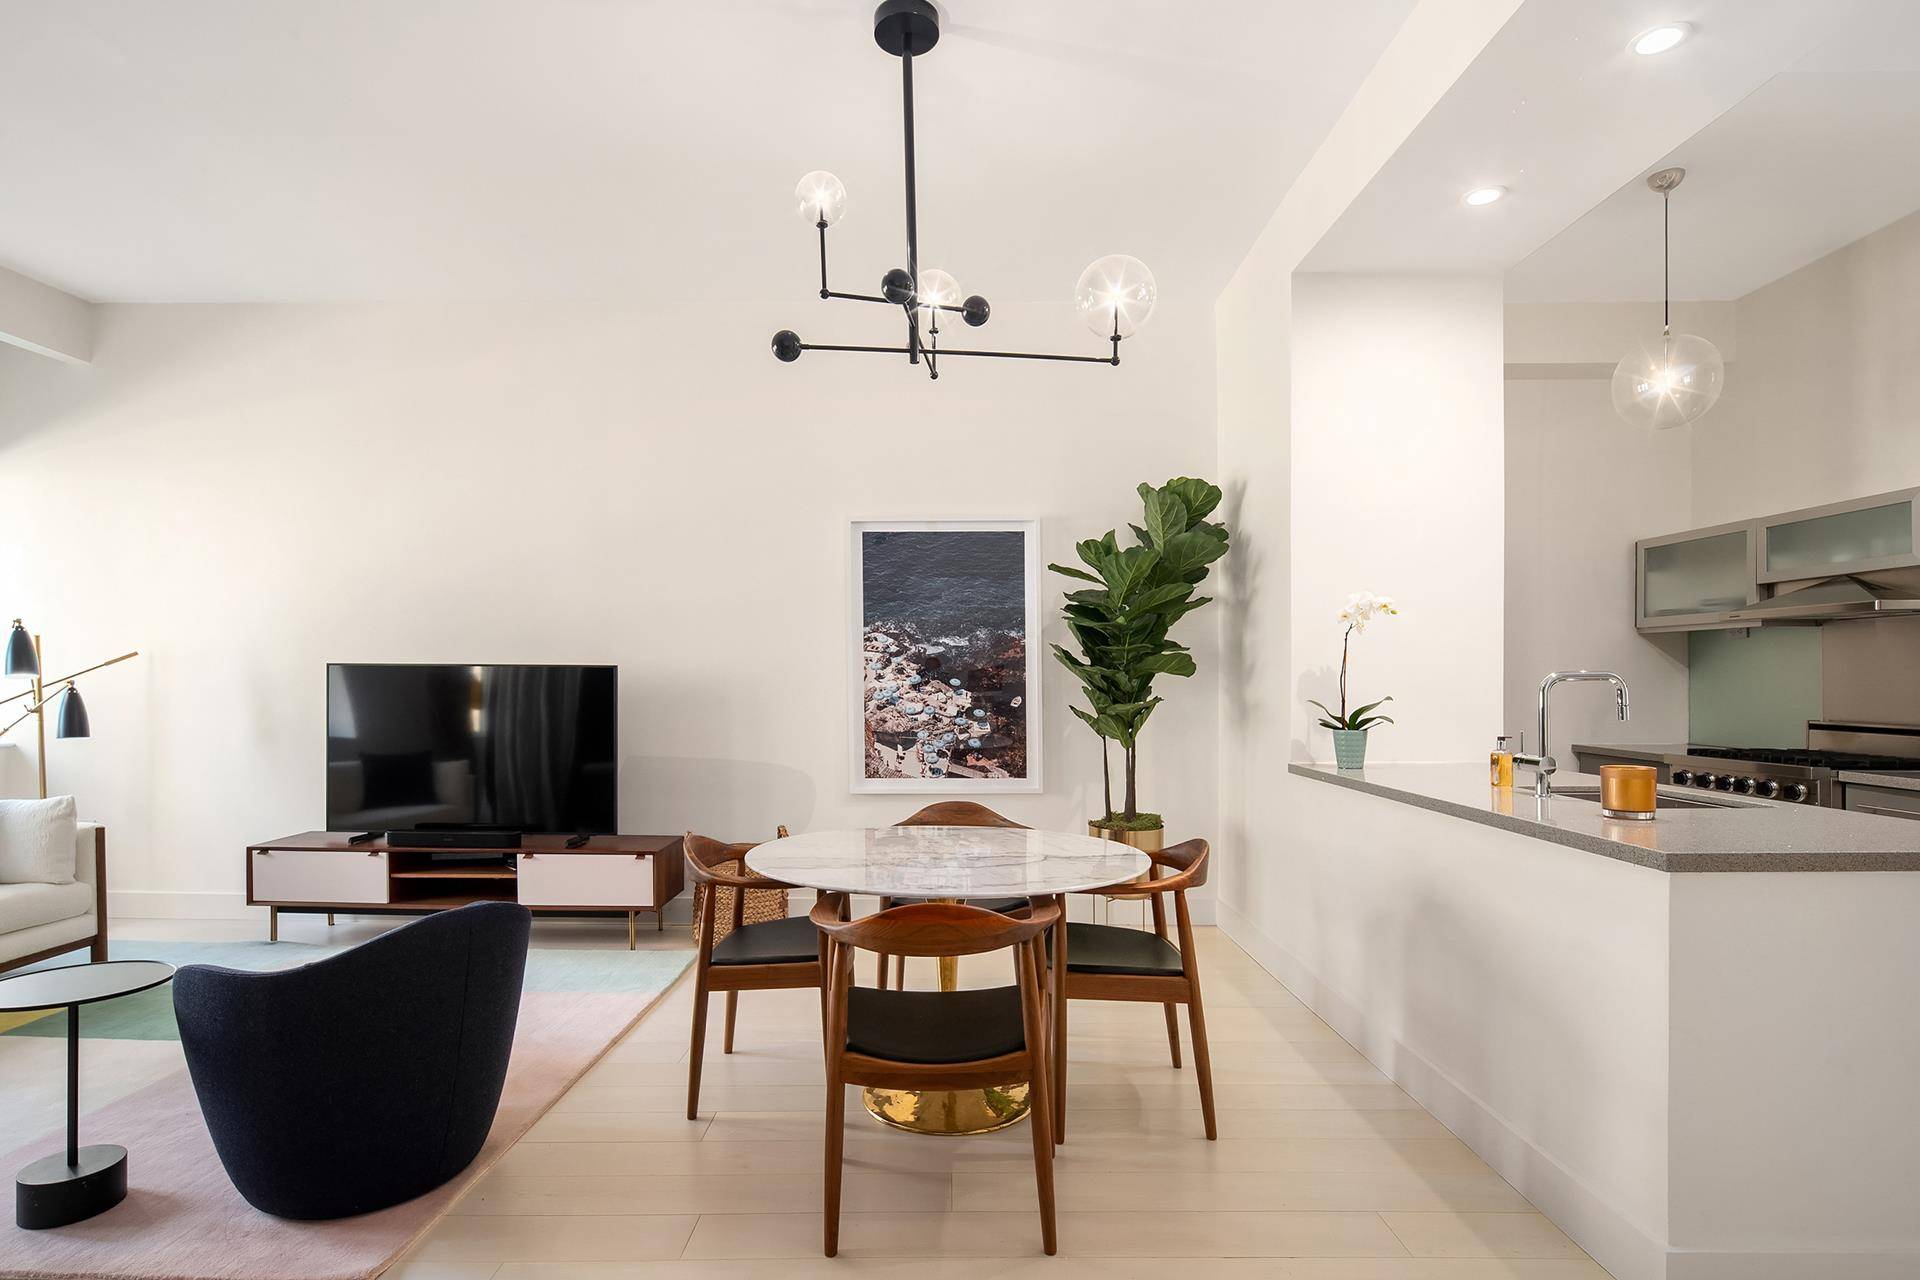 SoHo 25 is an intimate boutique condominium residence located in Prime SOHO between Mercer Street and Greene Street in the historic Cast Iron district.